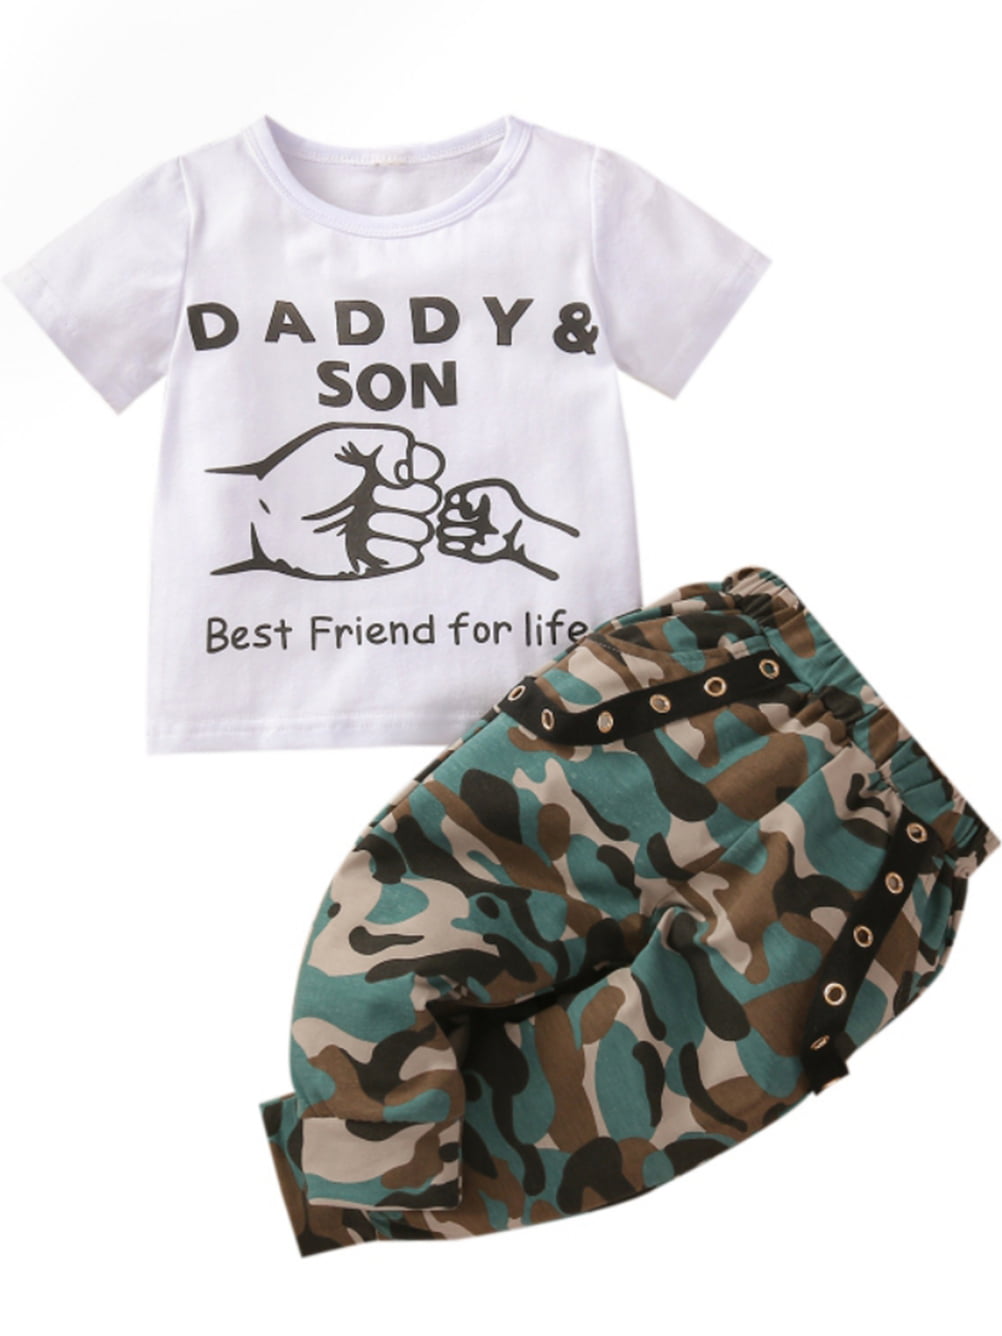 youth Toddler Baby Bodysuit Ain\u2019t A Man Alive That Could Take My Daddy's Place Onesies\u00ae Baby First Outfit